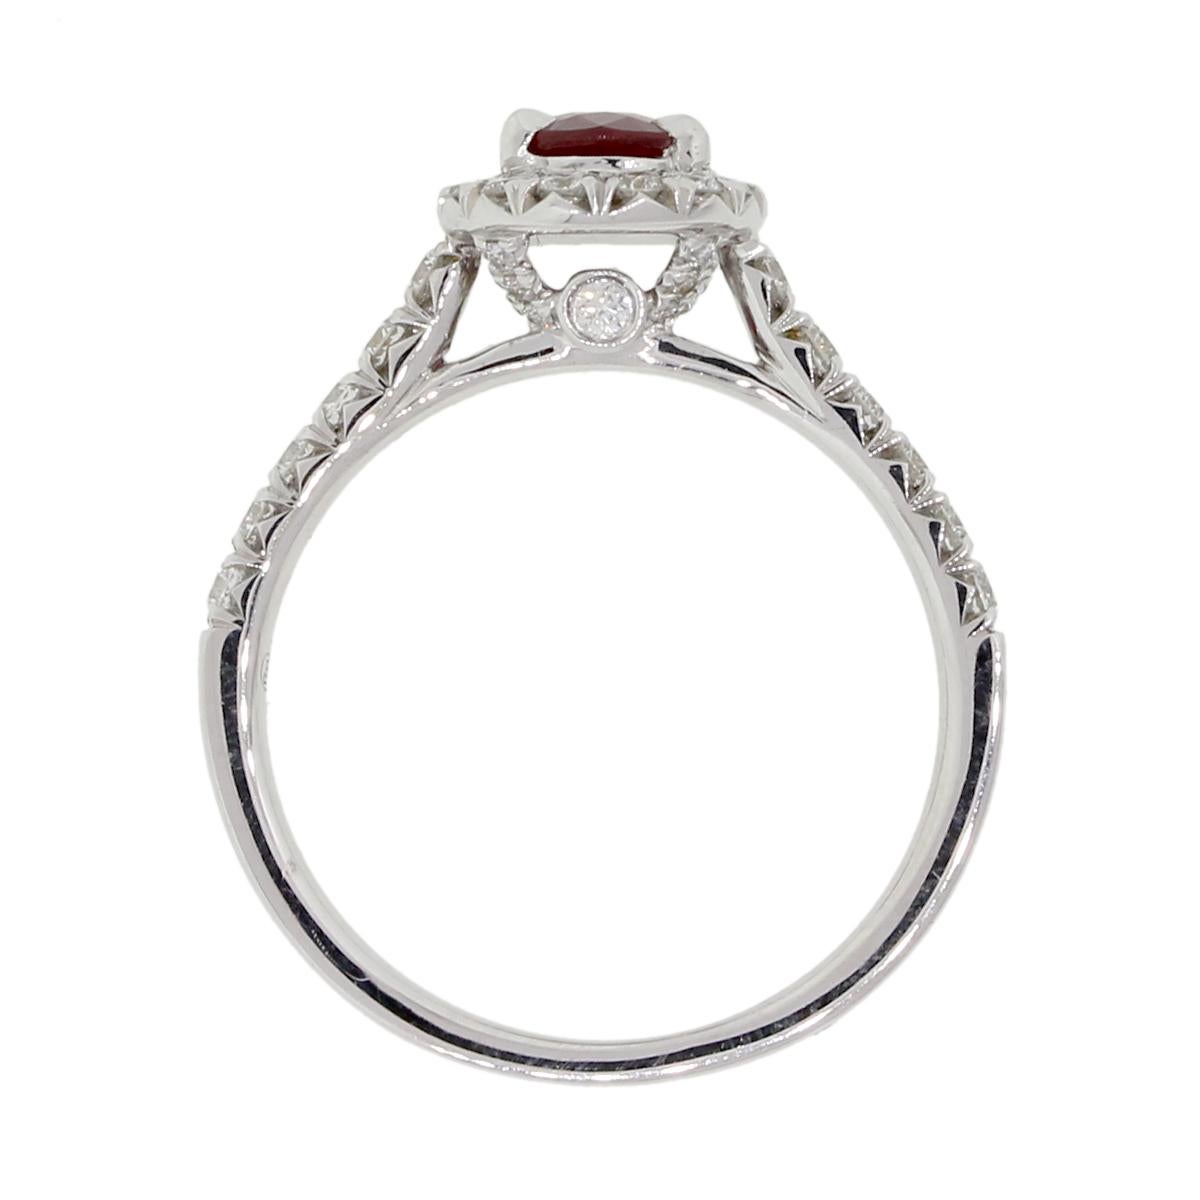 Material: Platinum
Gemstone Details: GIA certified 1.82ct oval shape ruby. GIA # 6177602882
Diamond Details: Approximately 0.75ctw of round brilliant diamonds. Diamonds are G/H in color and VS in clarity
Size: 6.50
Total Weight: 7.4g